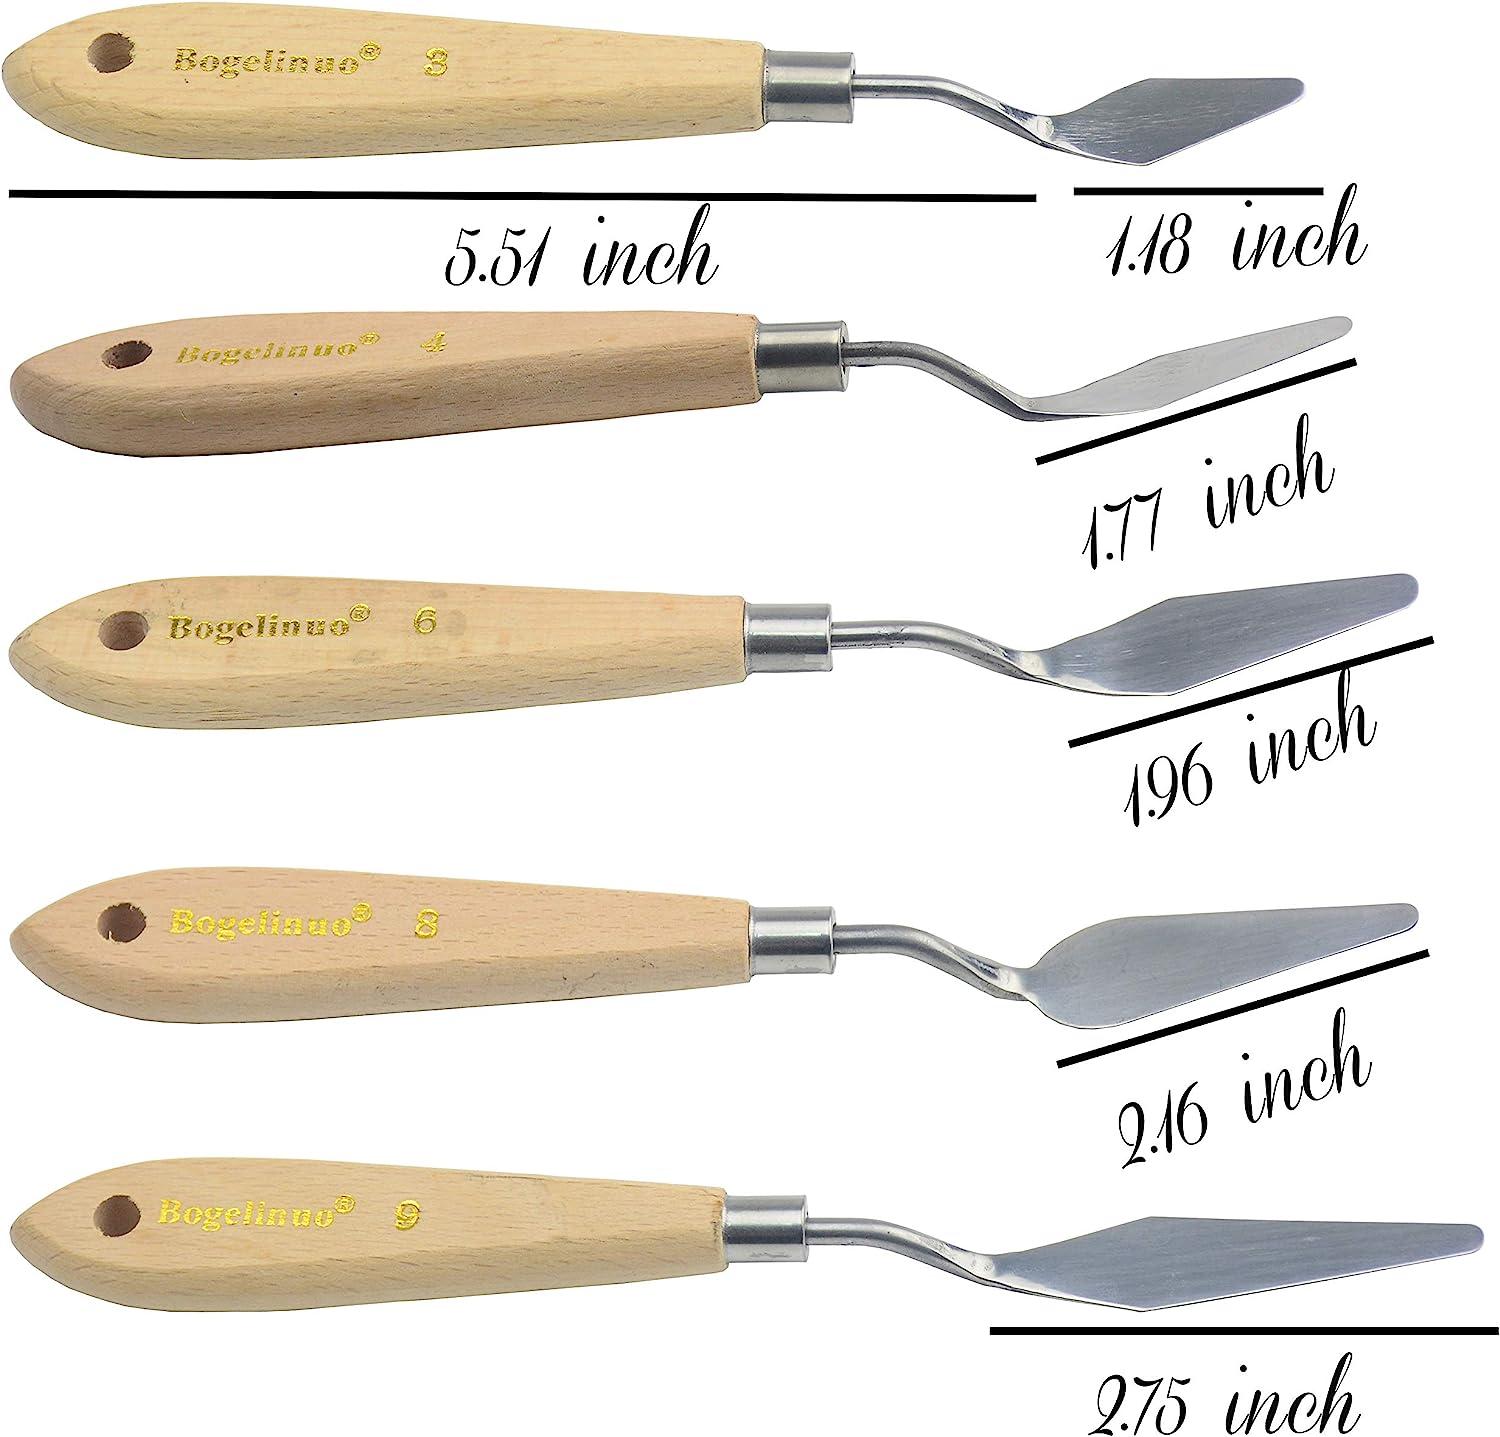 5pcs Stainless Steel Artists Palette Knife Set, Small Size for Painting  Mixing Scraper,Thin and Flexible Art Tools for Oil Painting, Acrylic Mixing